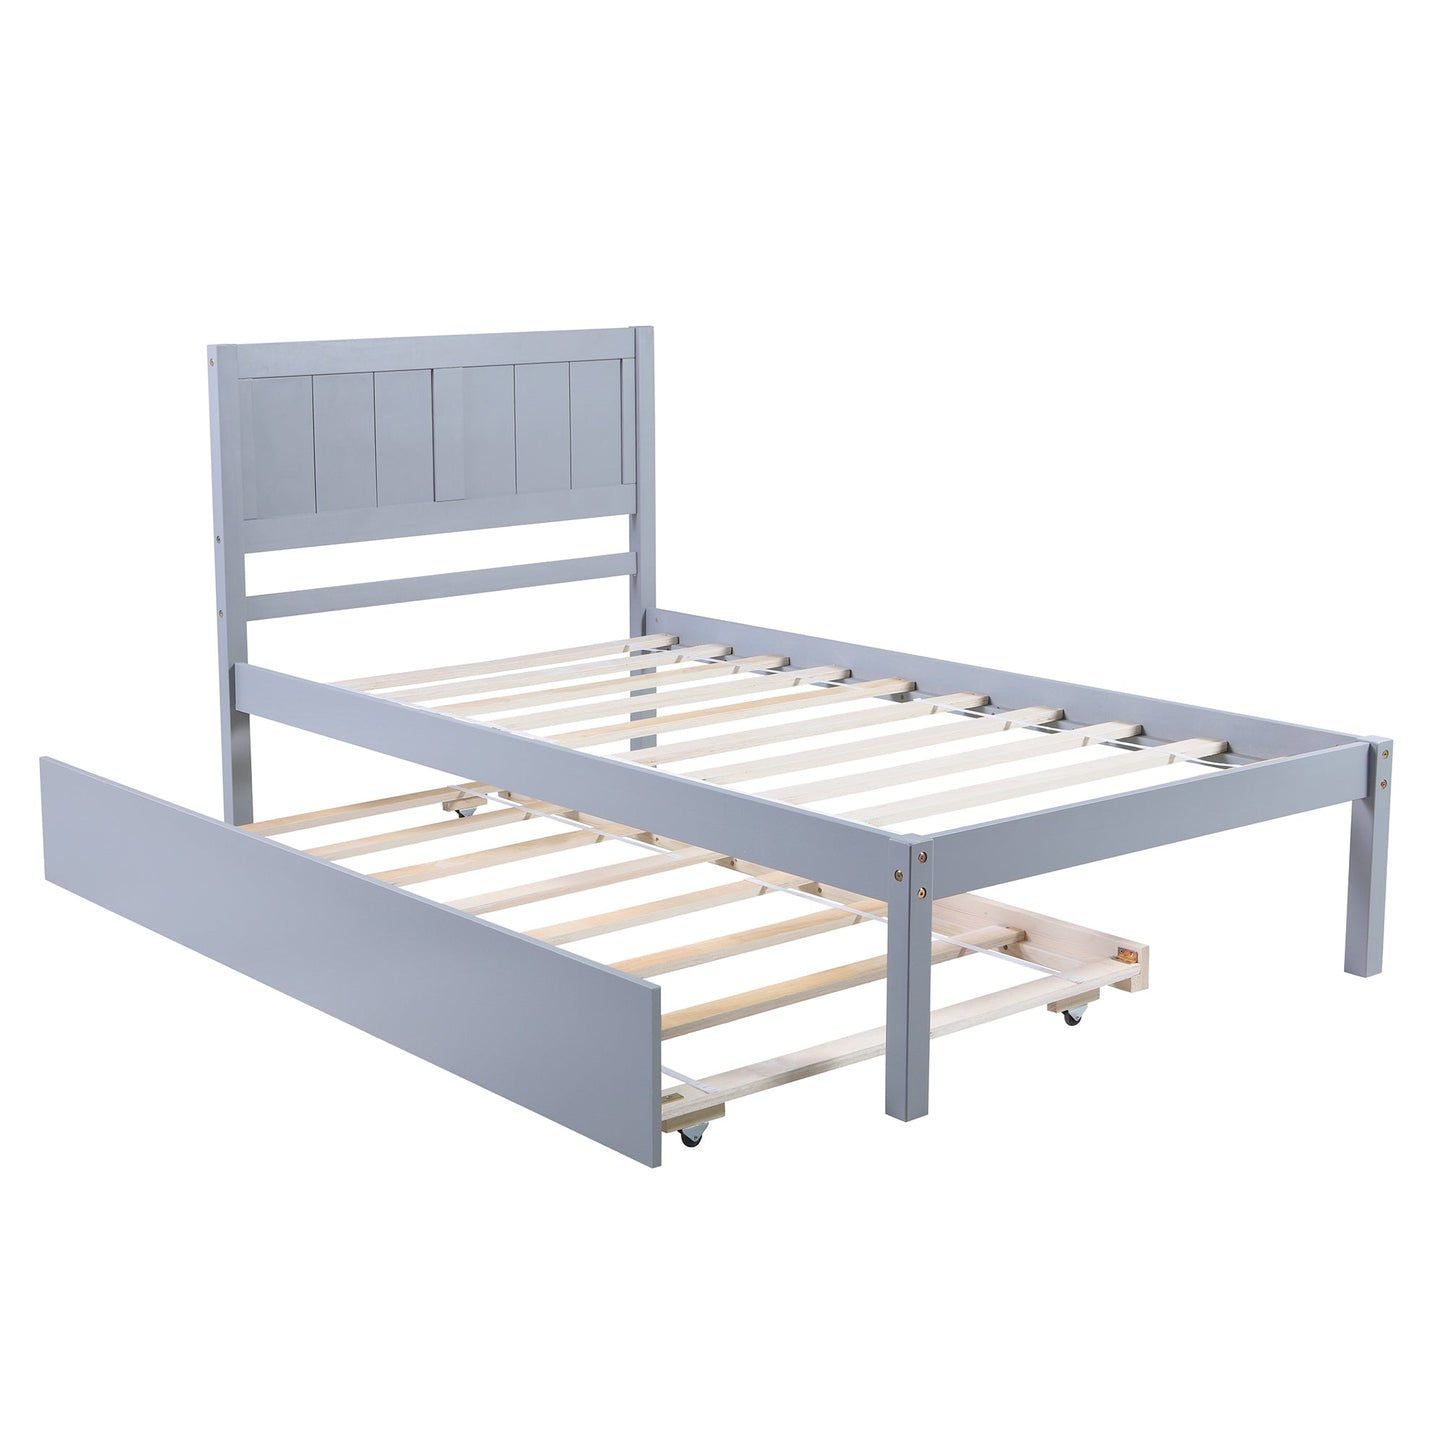 SYNGAR Twin Bed with Trundle, Wood Twin Platform Bed with Headboard, Captains Bed for Bedroom Small Living Space, Daybed with Trundle for Boys Girls, No Box Spring Needed - Gray, K4057